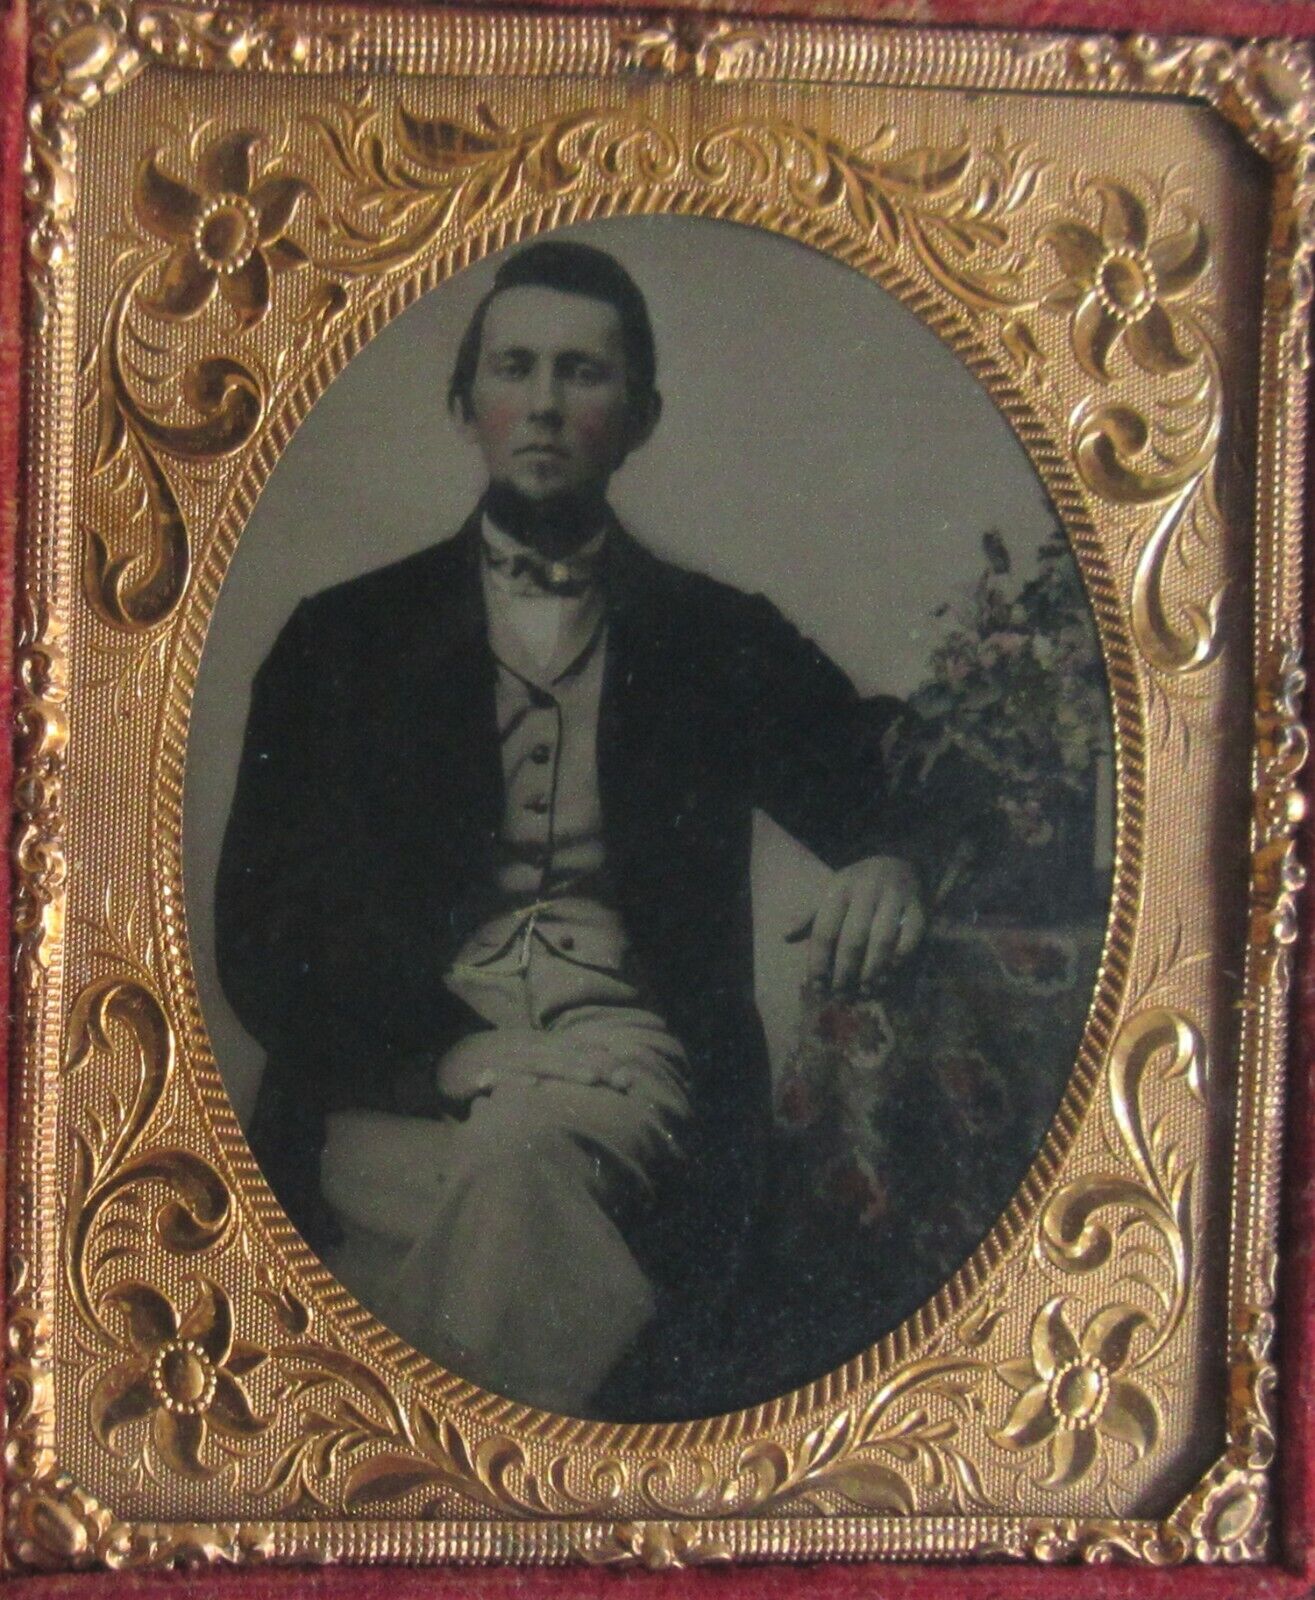 MAN SEATED AT TABLE. LOVELY TINTED 6TH PLATE AMBROTYPE, FULL CASE.